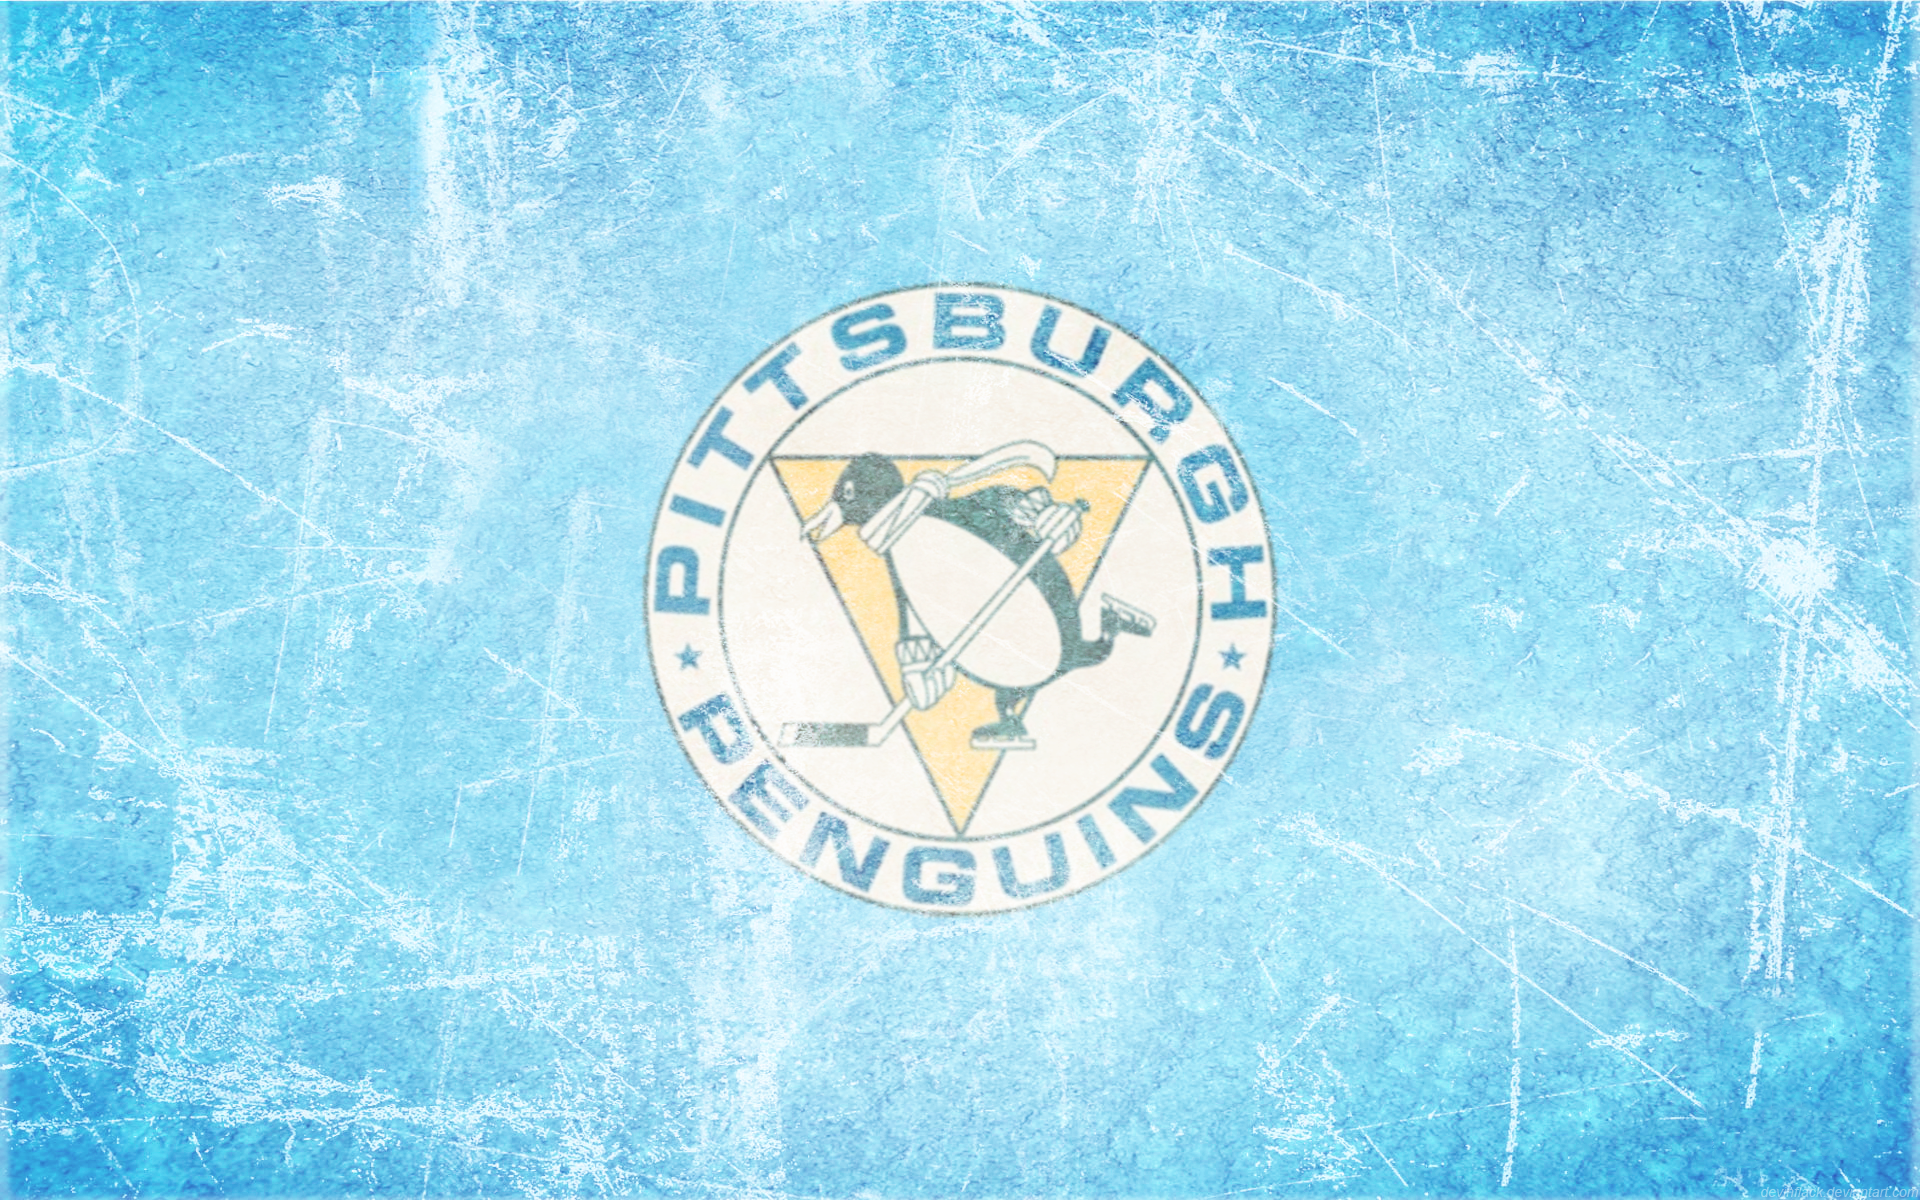 Pittsburgh Penguins by Cmuciik on DeviantArt